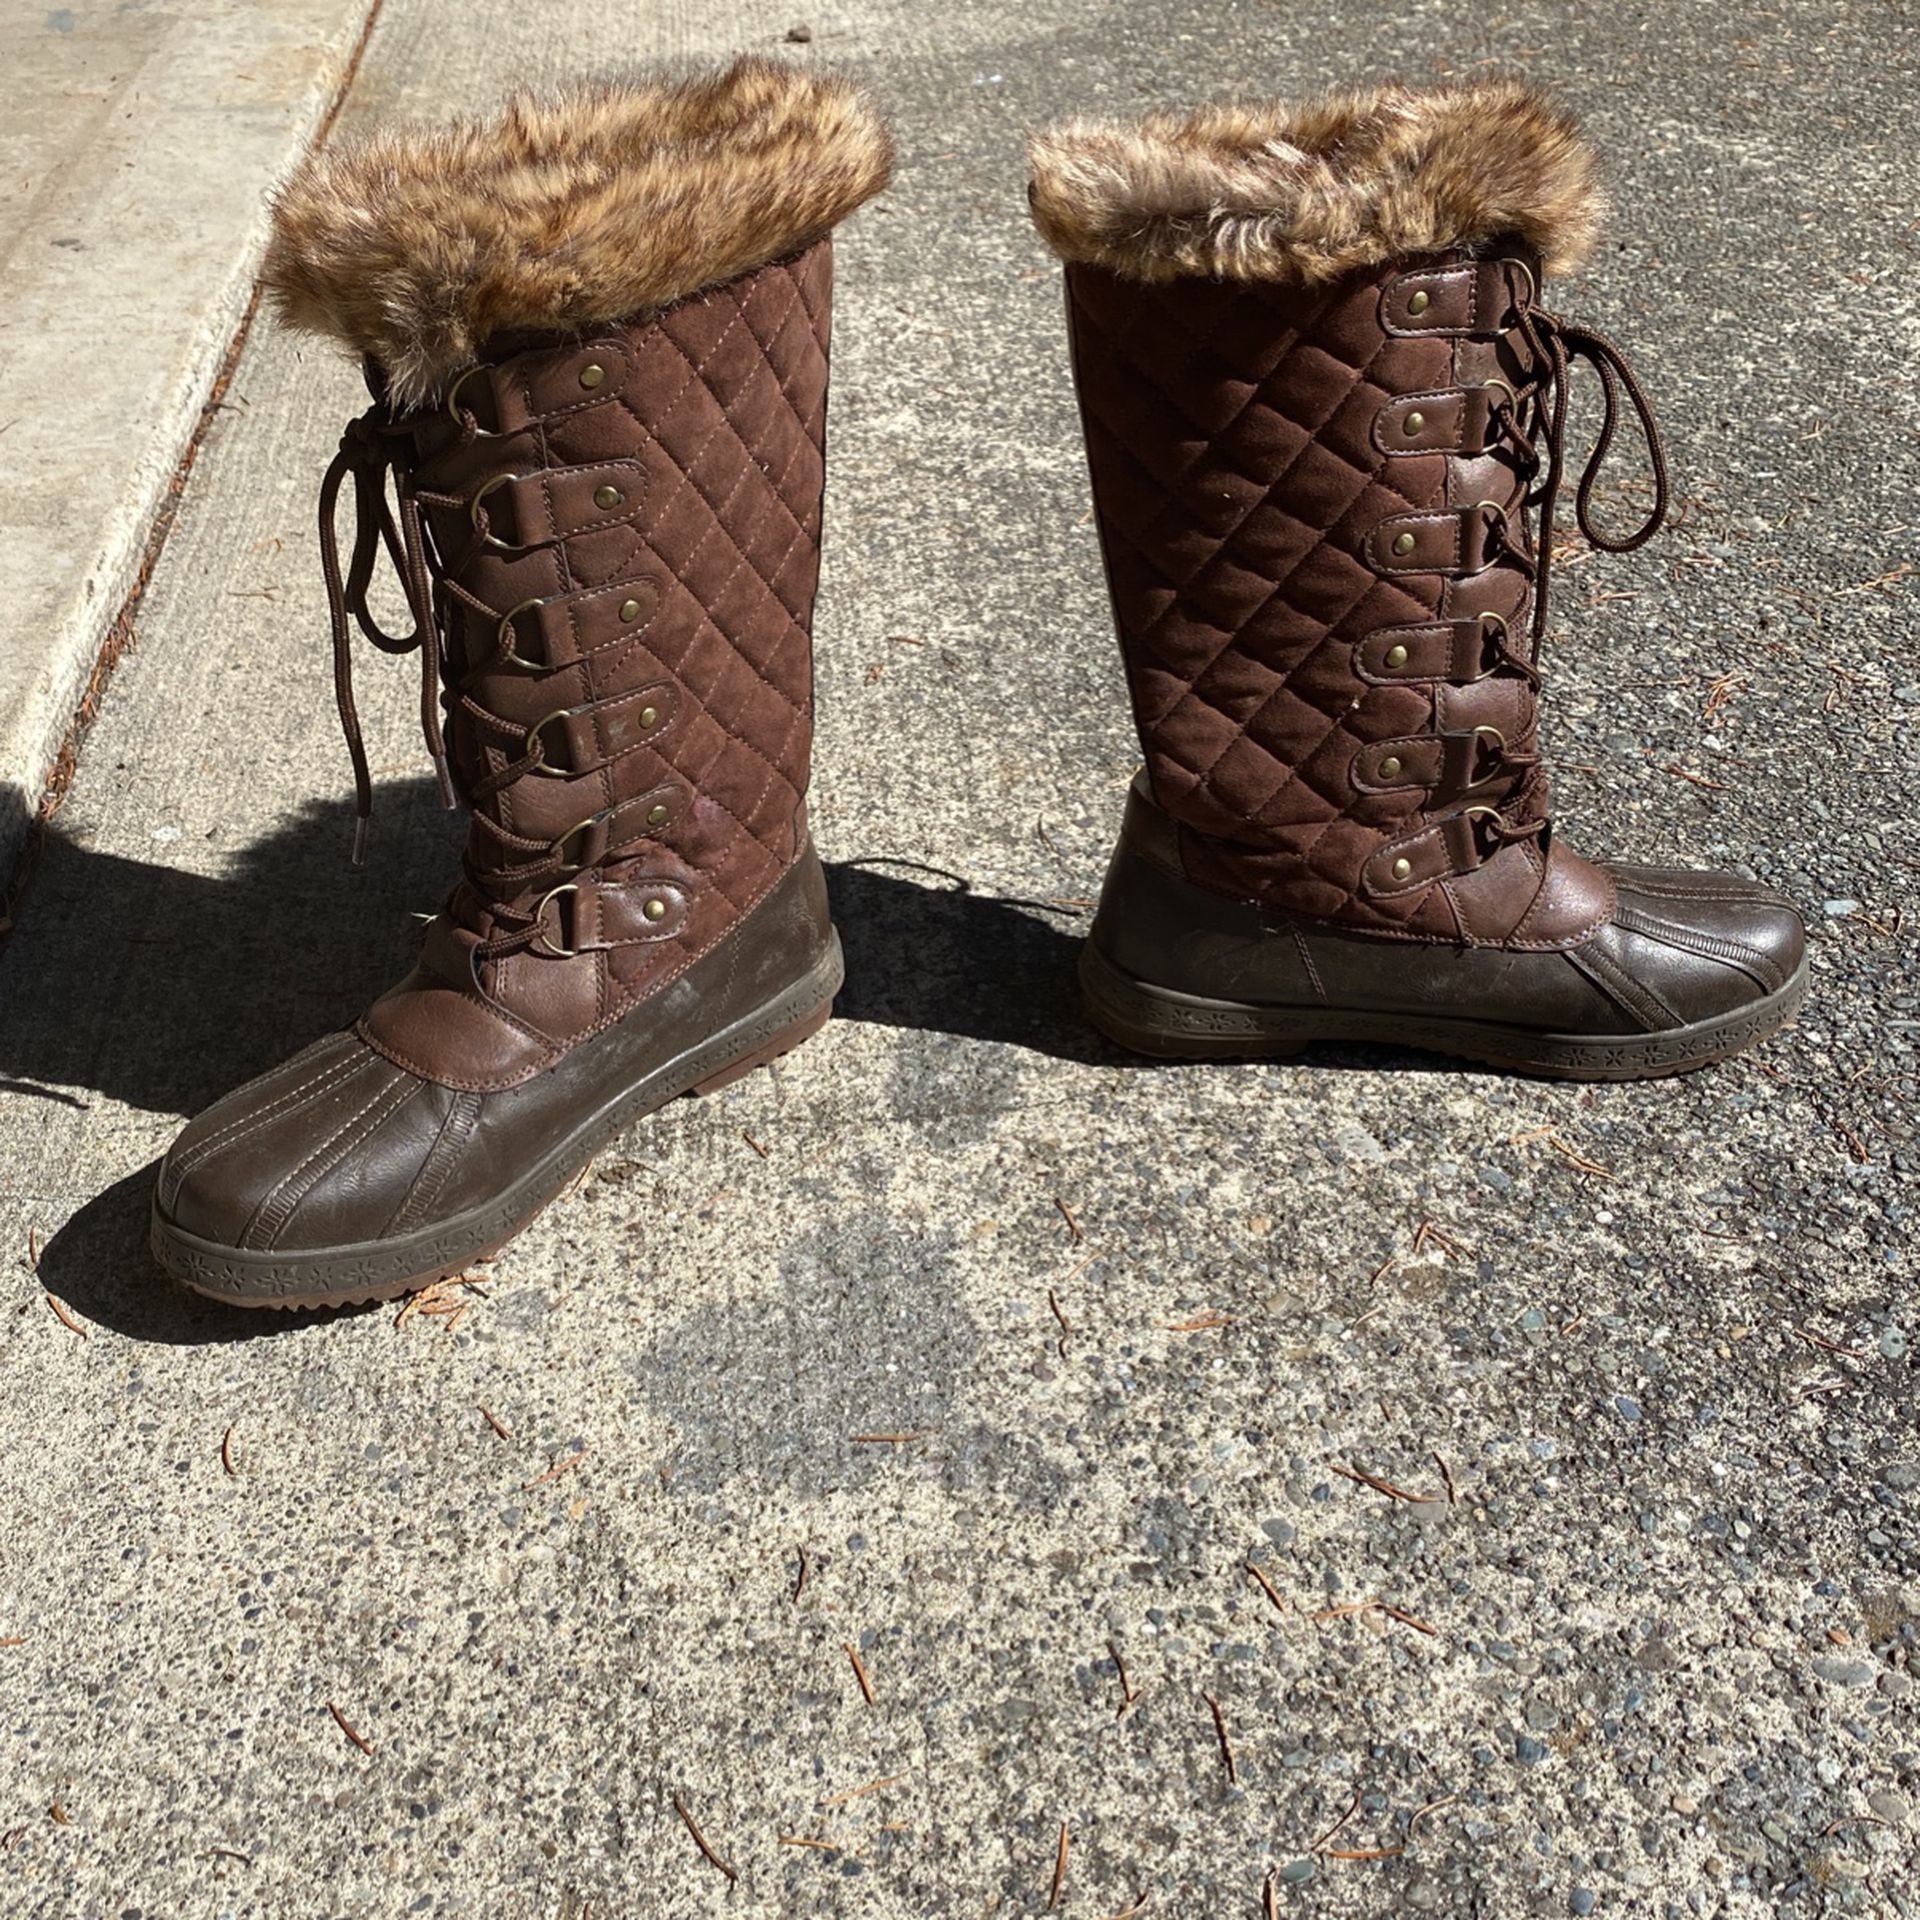 Women’s Snow Boots Size 8 Brown